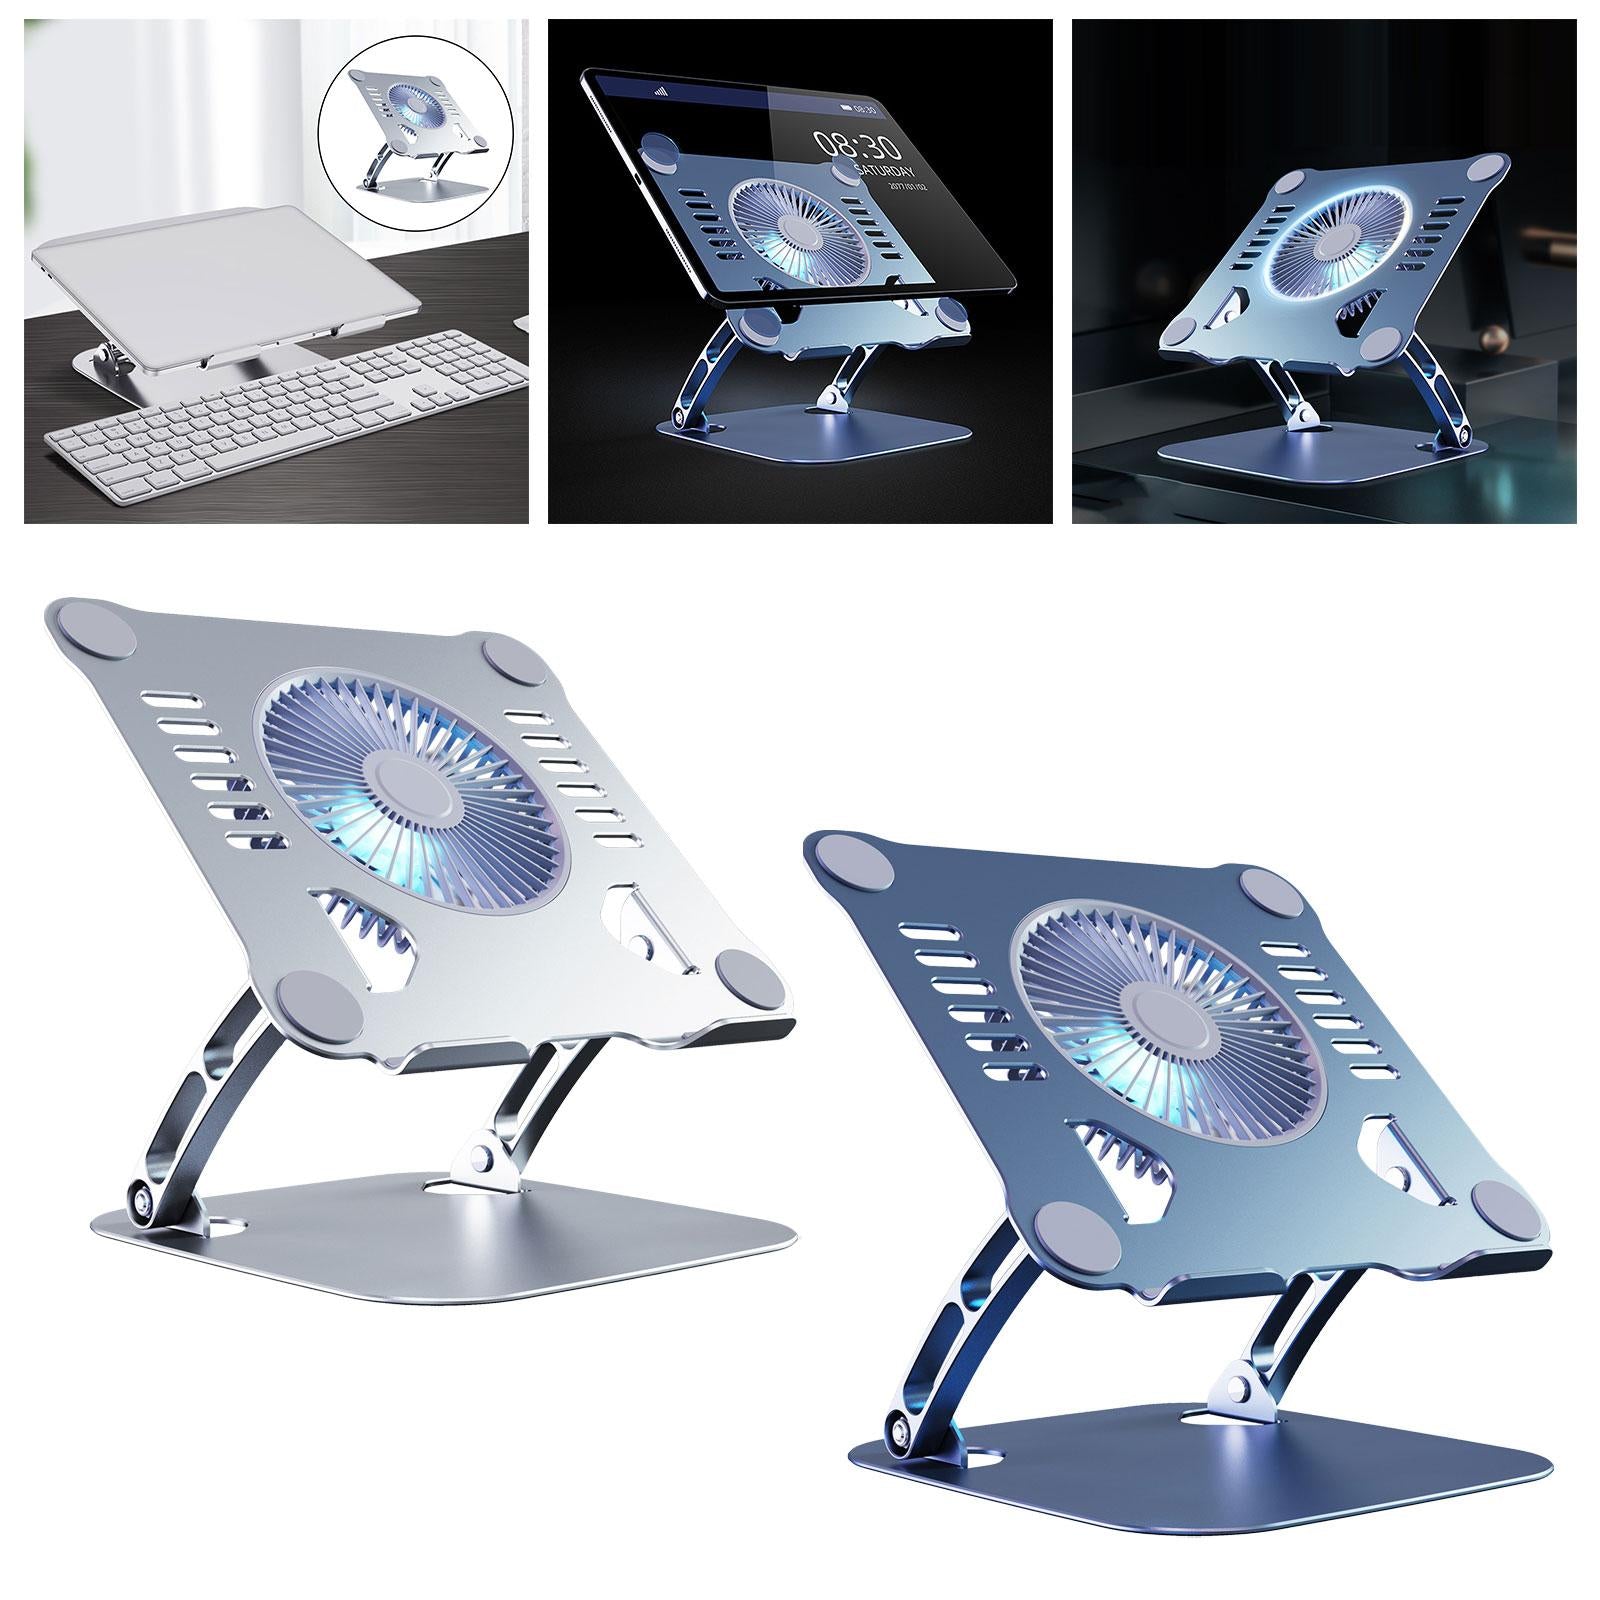 Laptop Holder with Cooling Fan Quiet Fan Adjustable for Notebook Desk Office Silver